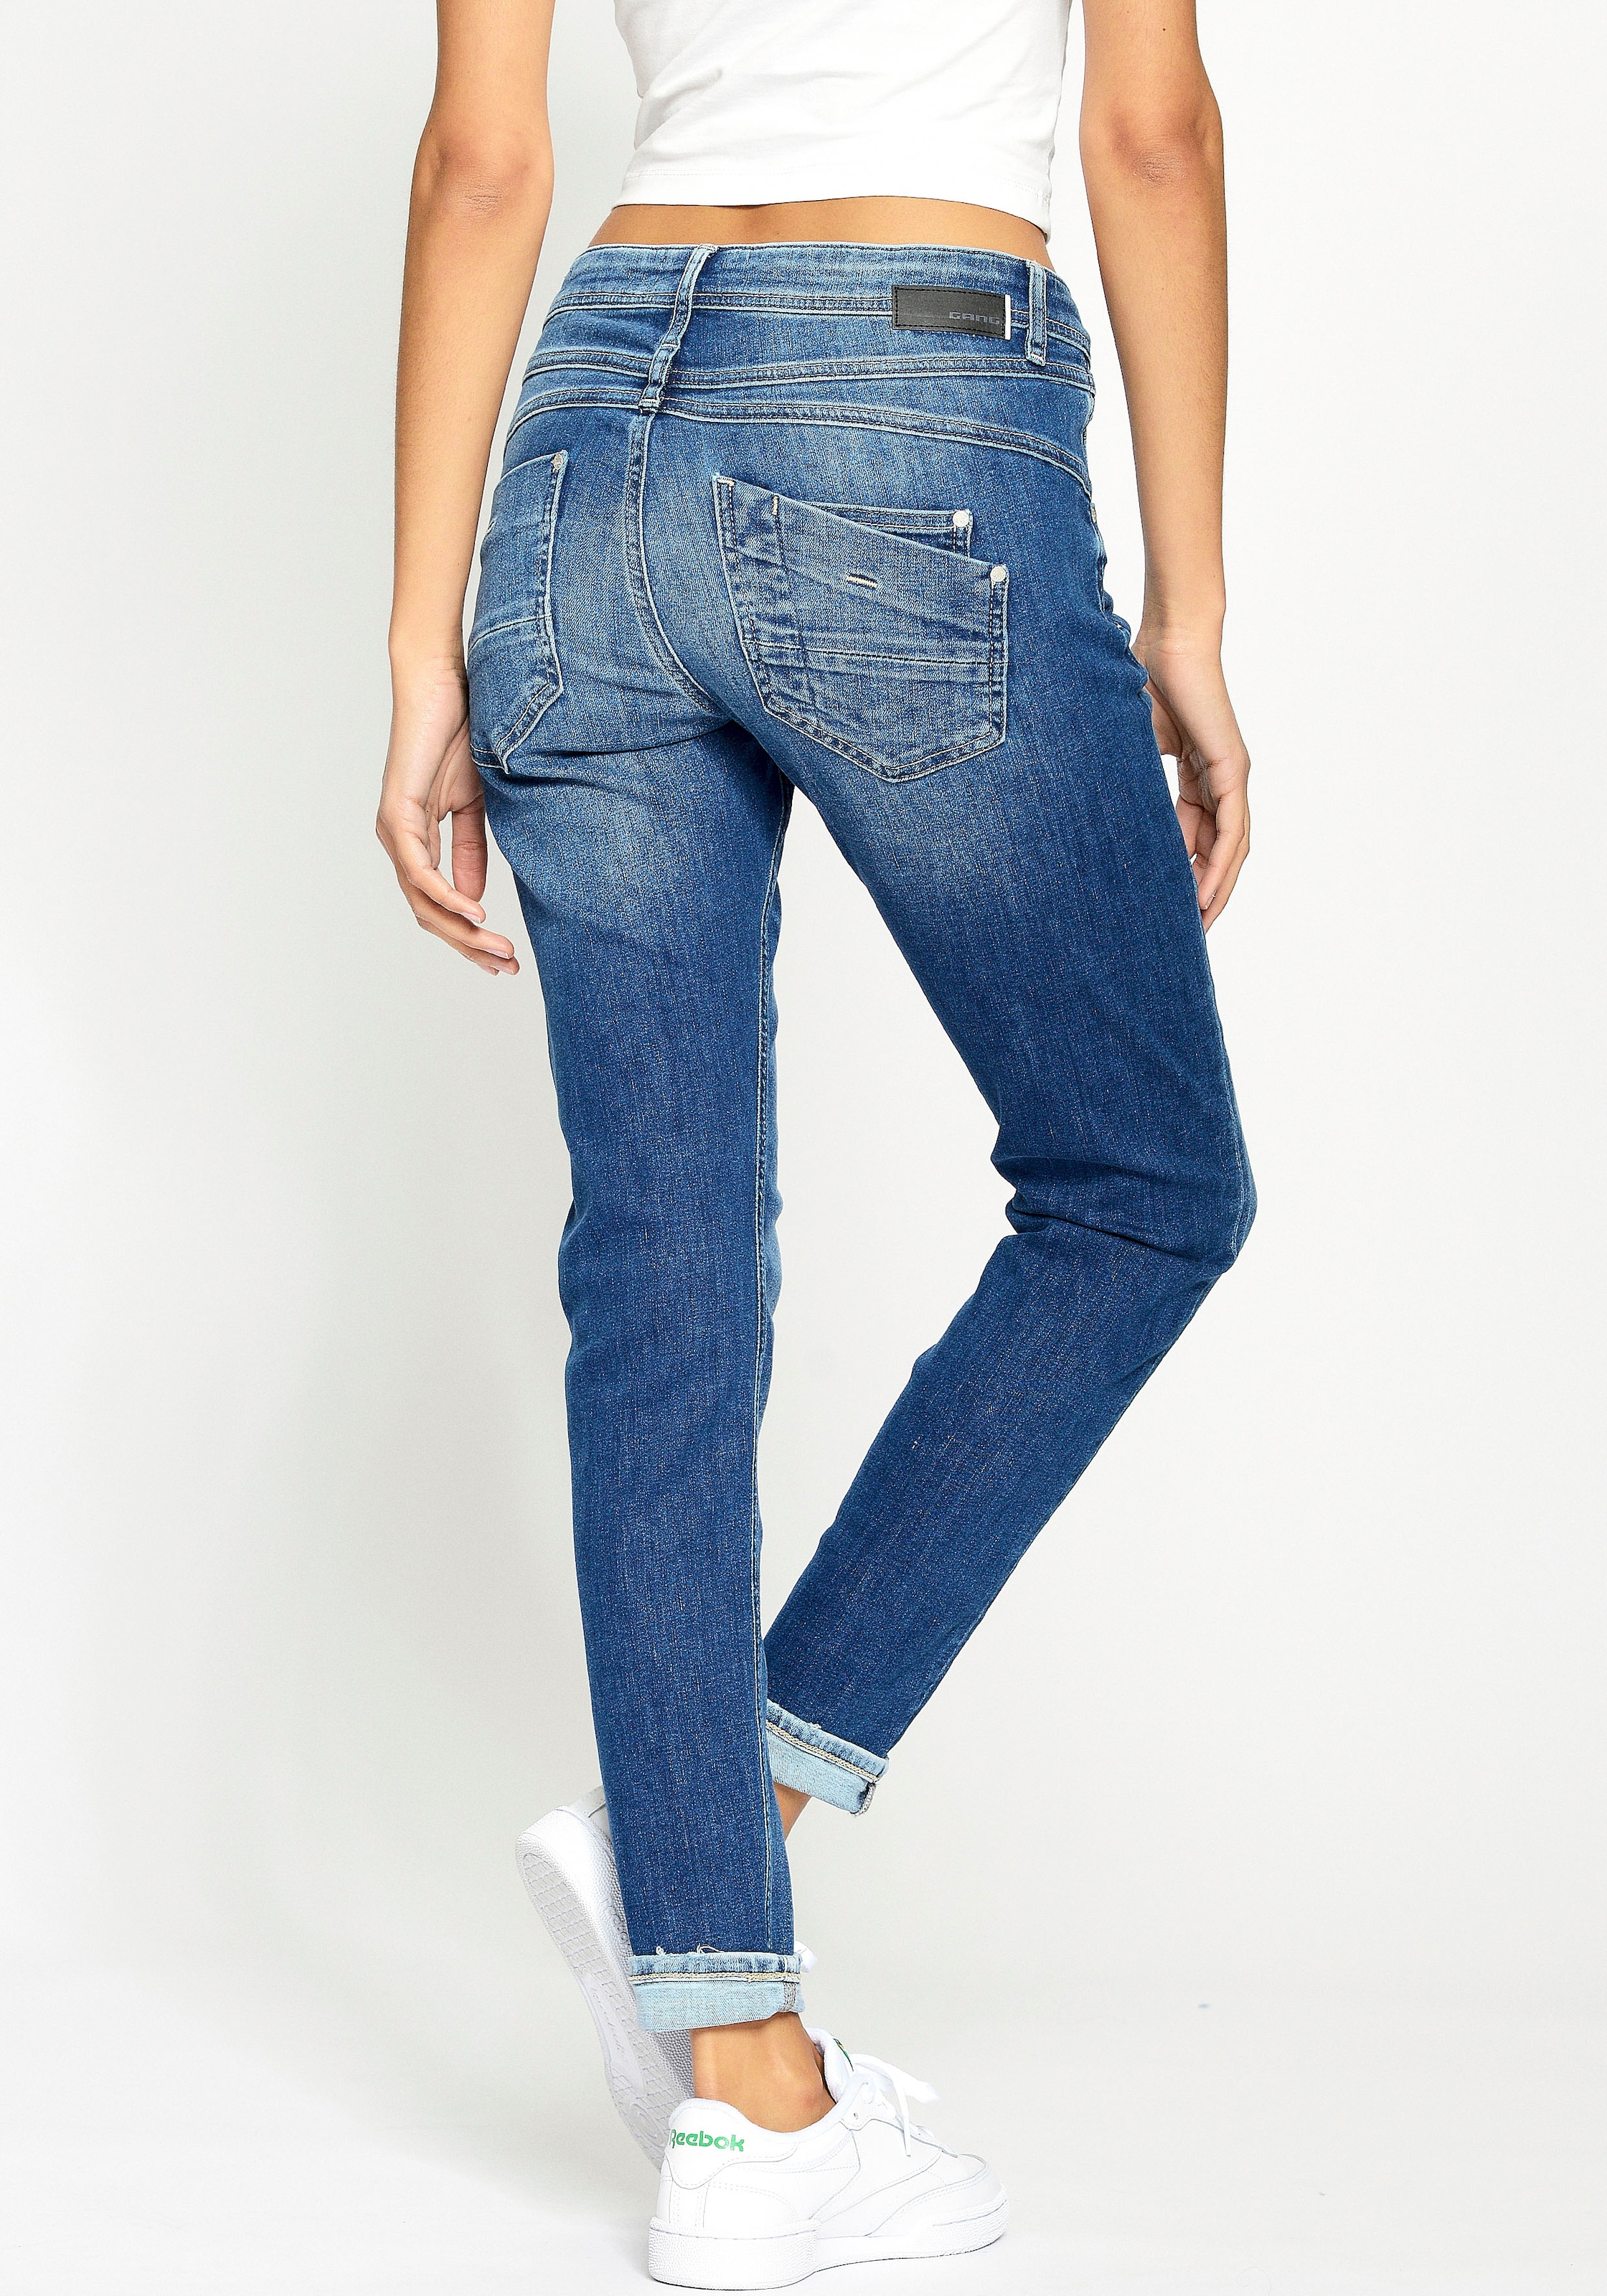 Fit«, Relaxed im Online Relax-fit-Jeans mit »94Amelie OTTO GANG Used-Effekten Shop